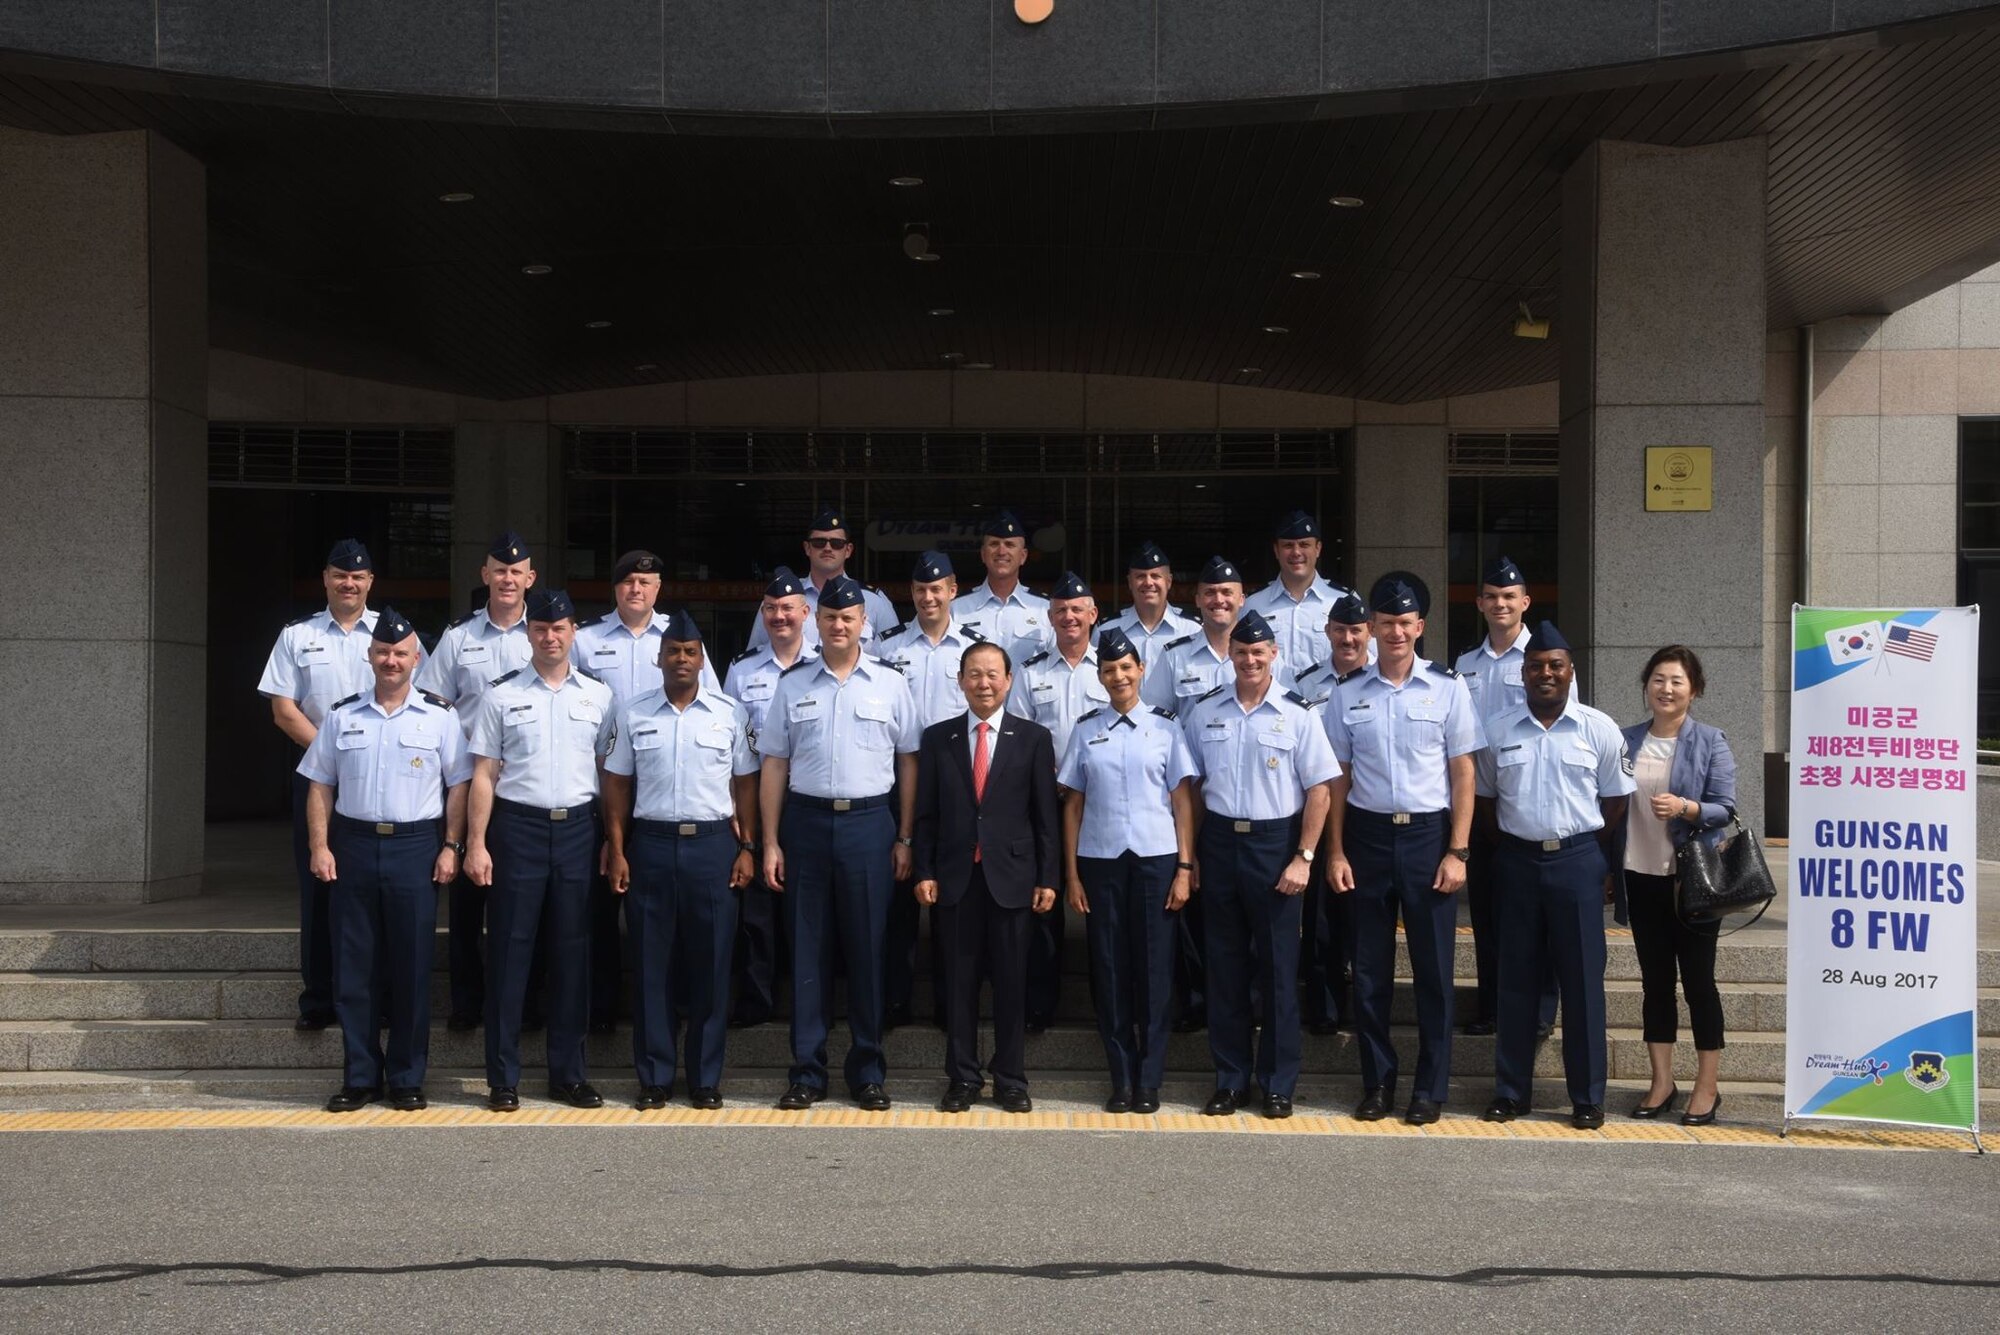 U.S. Air Force Airmen assigned to Kunsan Air Base, Republic of Korea, pose with Mayor Moon Dong-shin, Gunsan City Mayor, during an immersion tour in Gunsan City, ROK, Aug. 28, 2017. During the tour Airman ate a traditional bibimbap meal and experienced the history and heritage of South Korea at the Gunsan Modern History Museum. (U.S. Air Force photo by 2nd Lt. Brittany Curry)